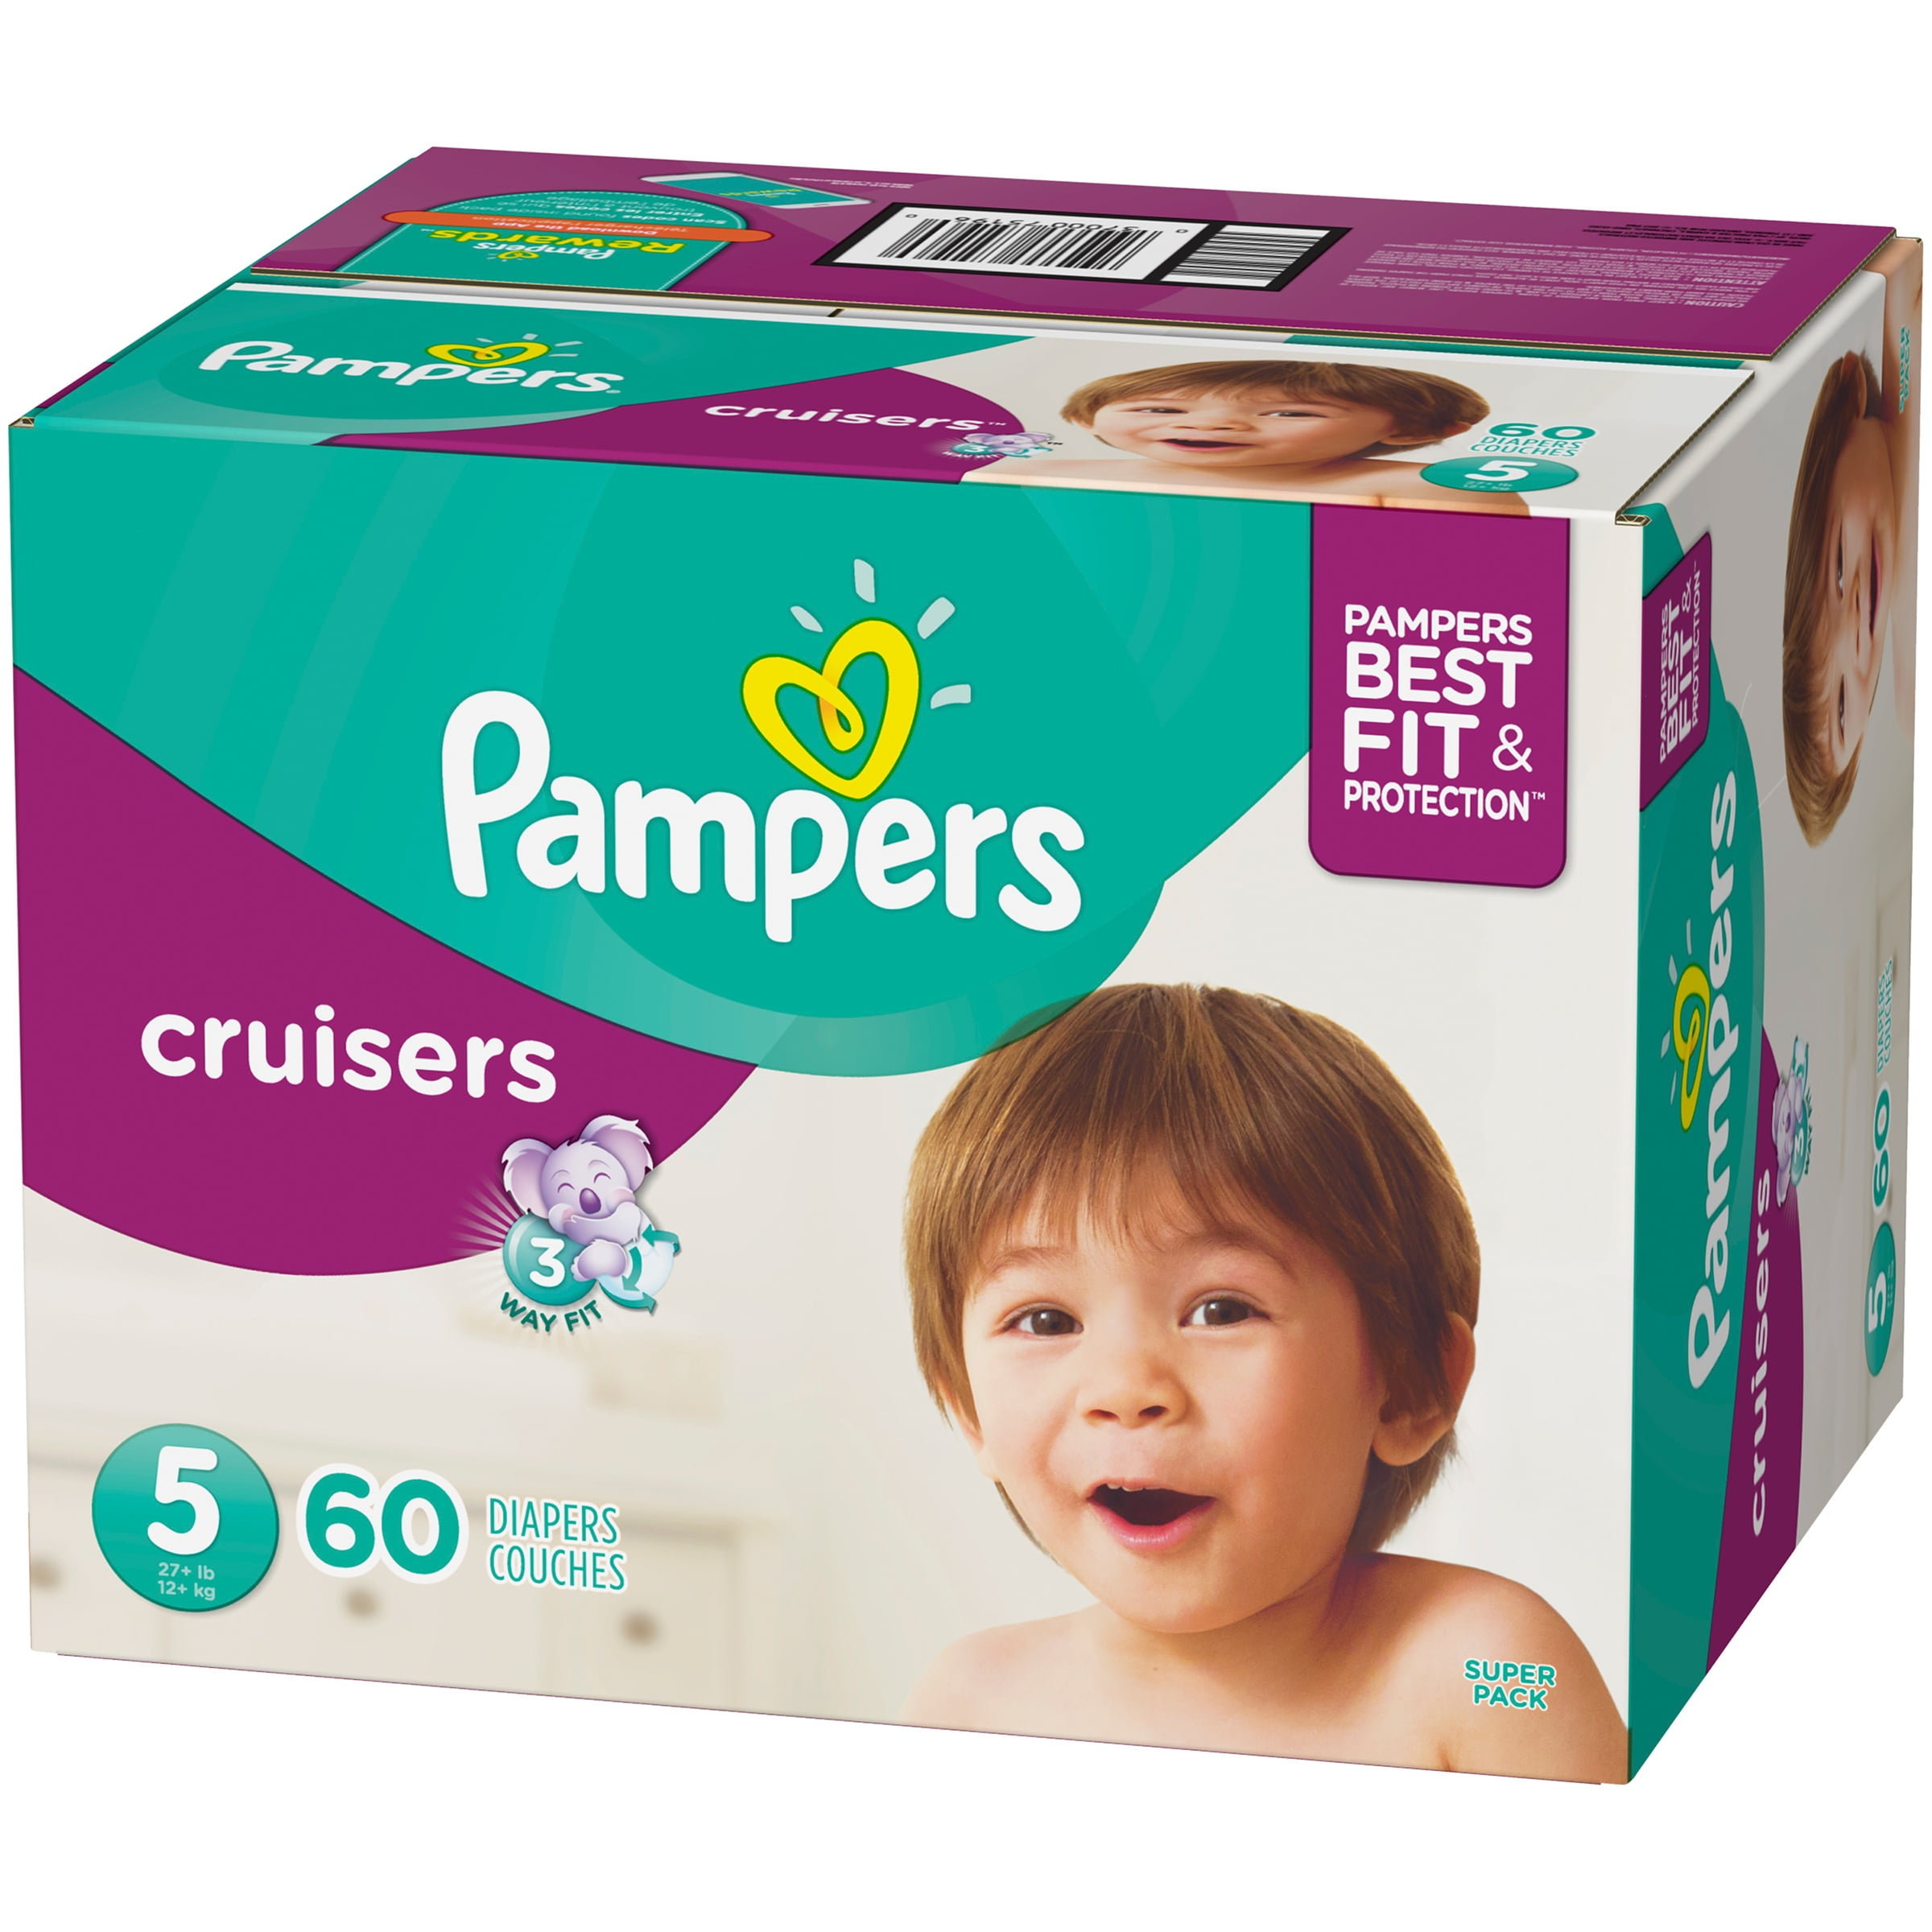 Pampers Cruisers Diapers Size 5, 60 